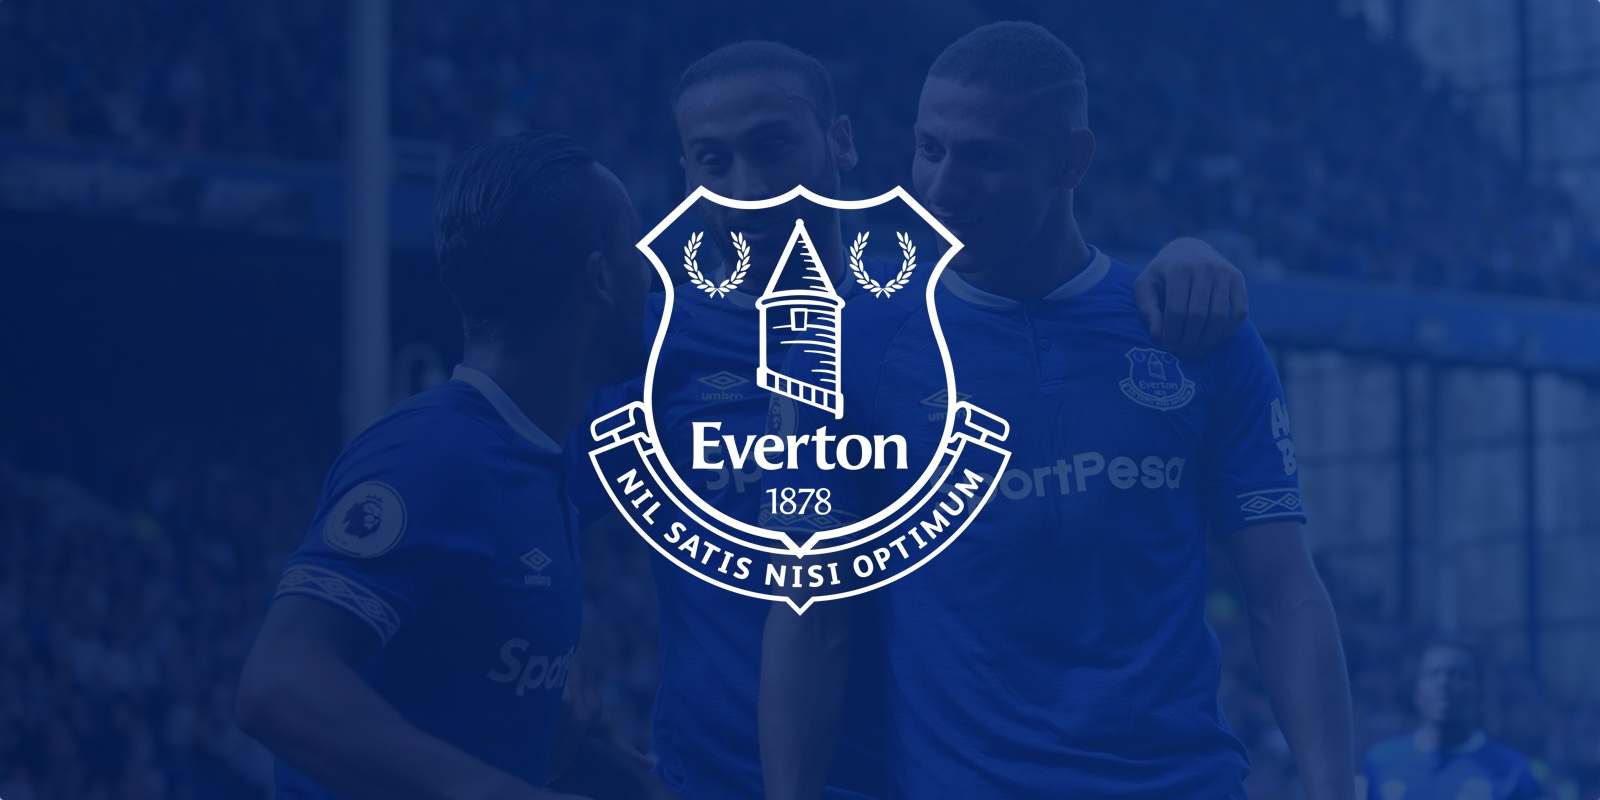 Everton announce a three-year sponsorship deal with Cazoo worth £27 million | Everton